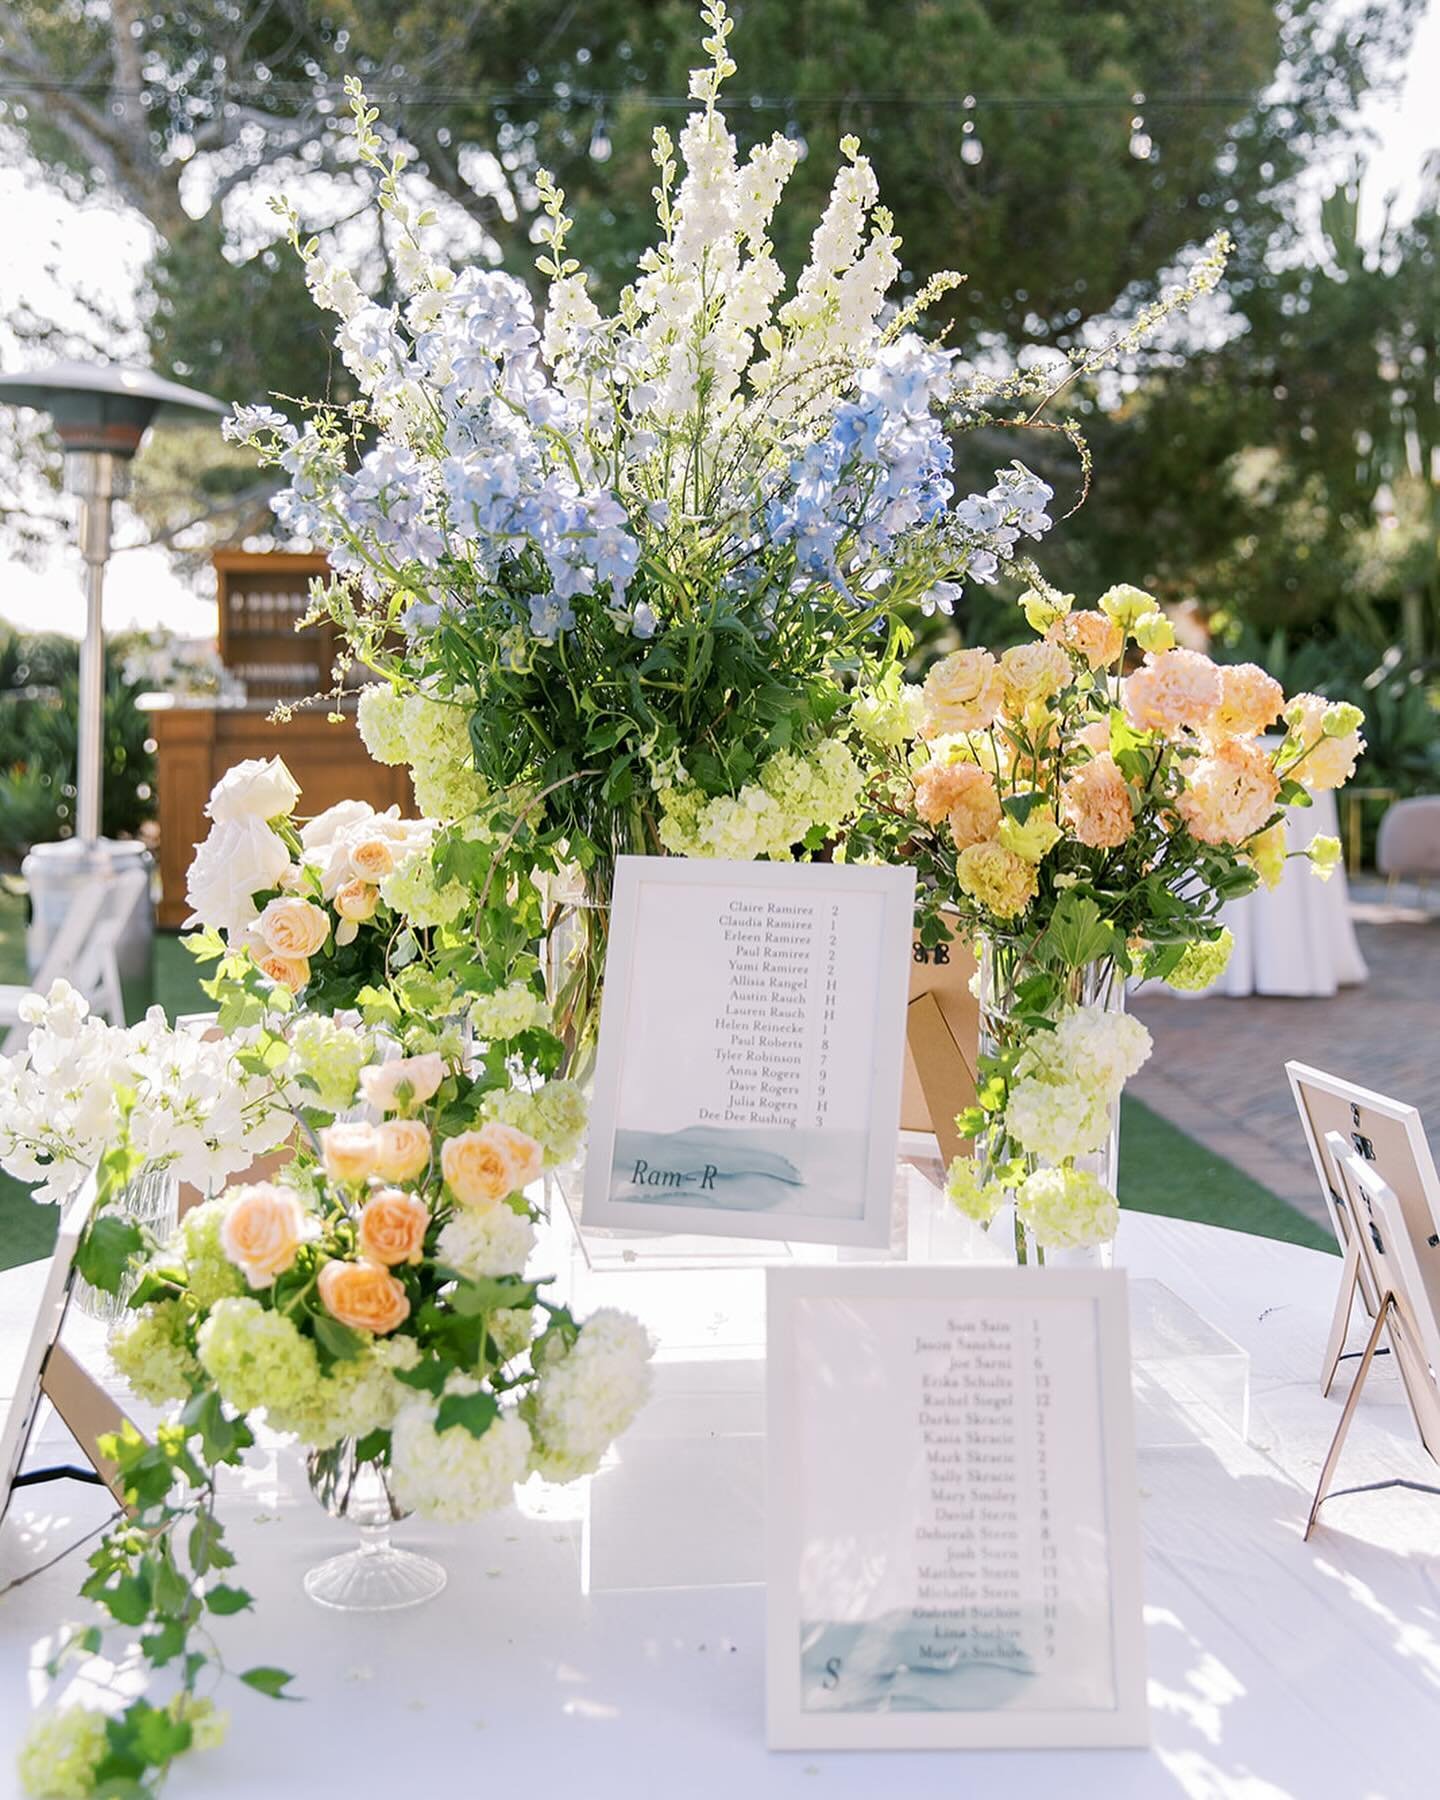 We brought back our infamous 360 seating chart concept for Mia &amp; Peter&rsquo;s wedding day and then turned it into a candy station for reception. Thank you @mulberryandmoss for glamming it up!!!

Venue: @terranearesort
Planning: @ilanarubinevents